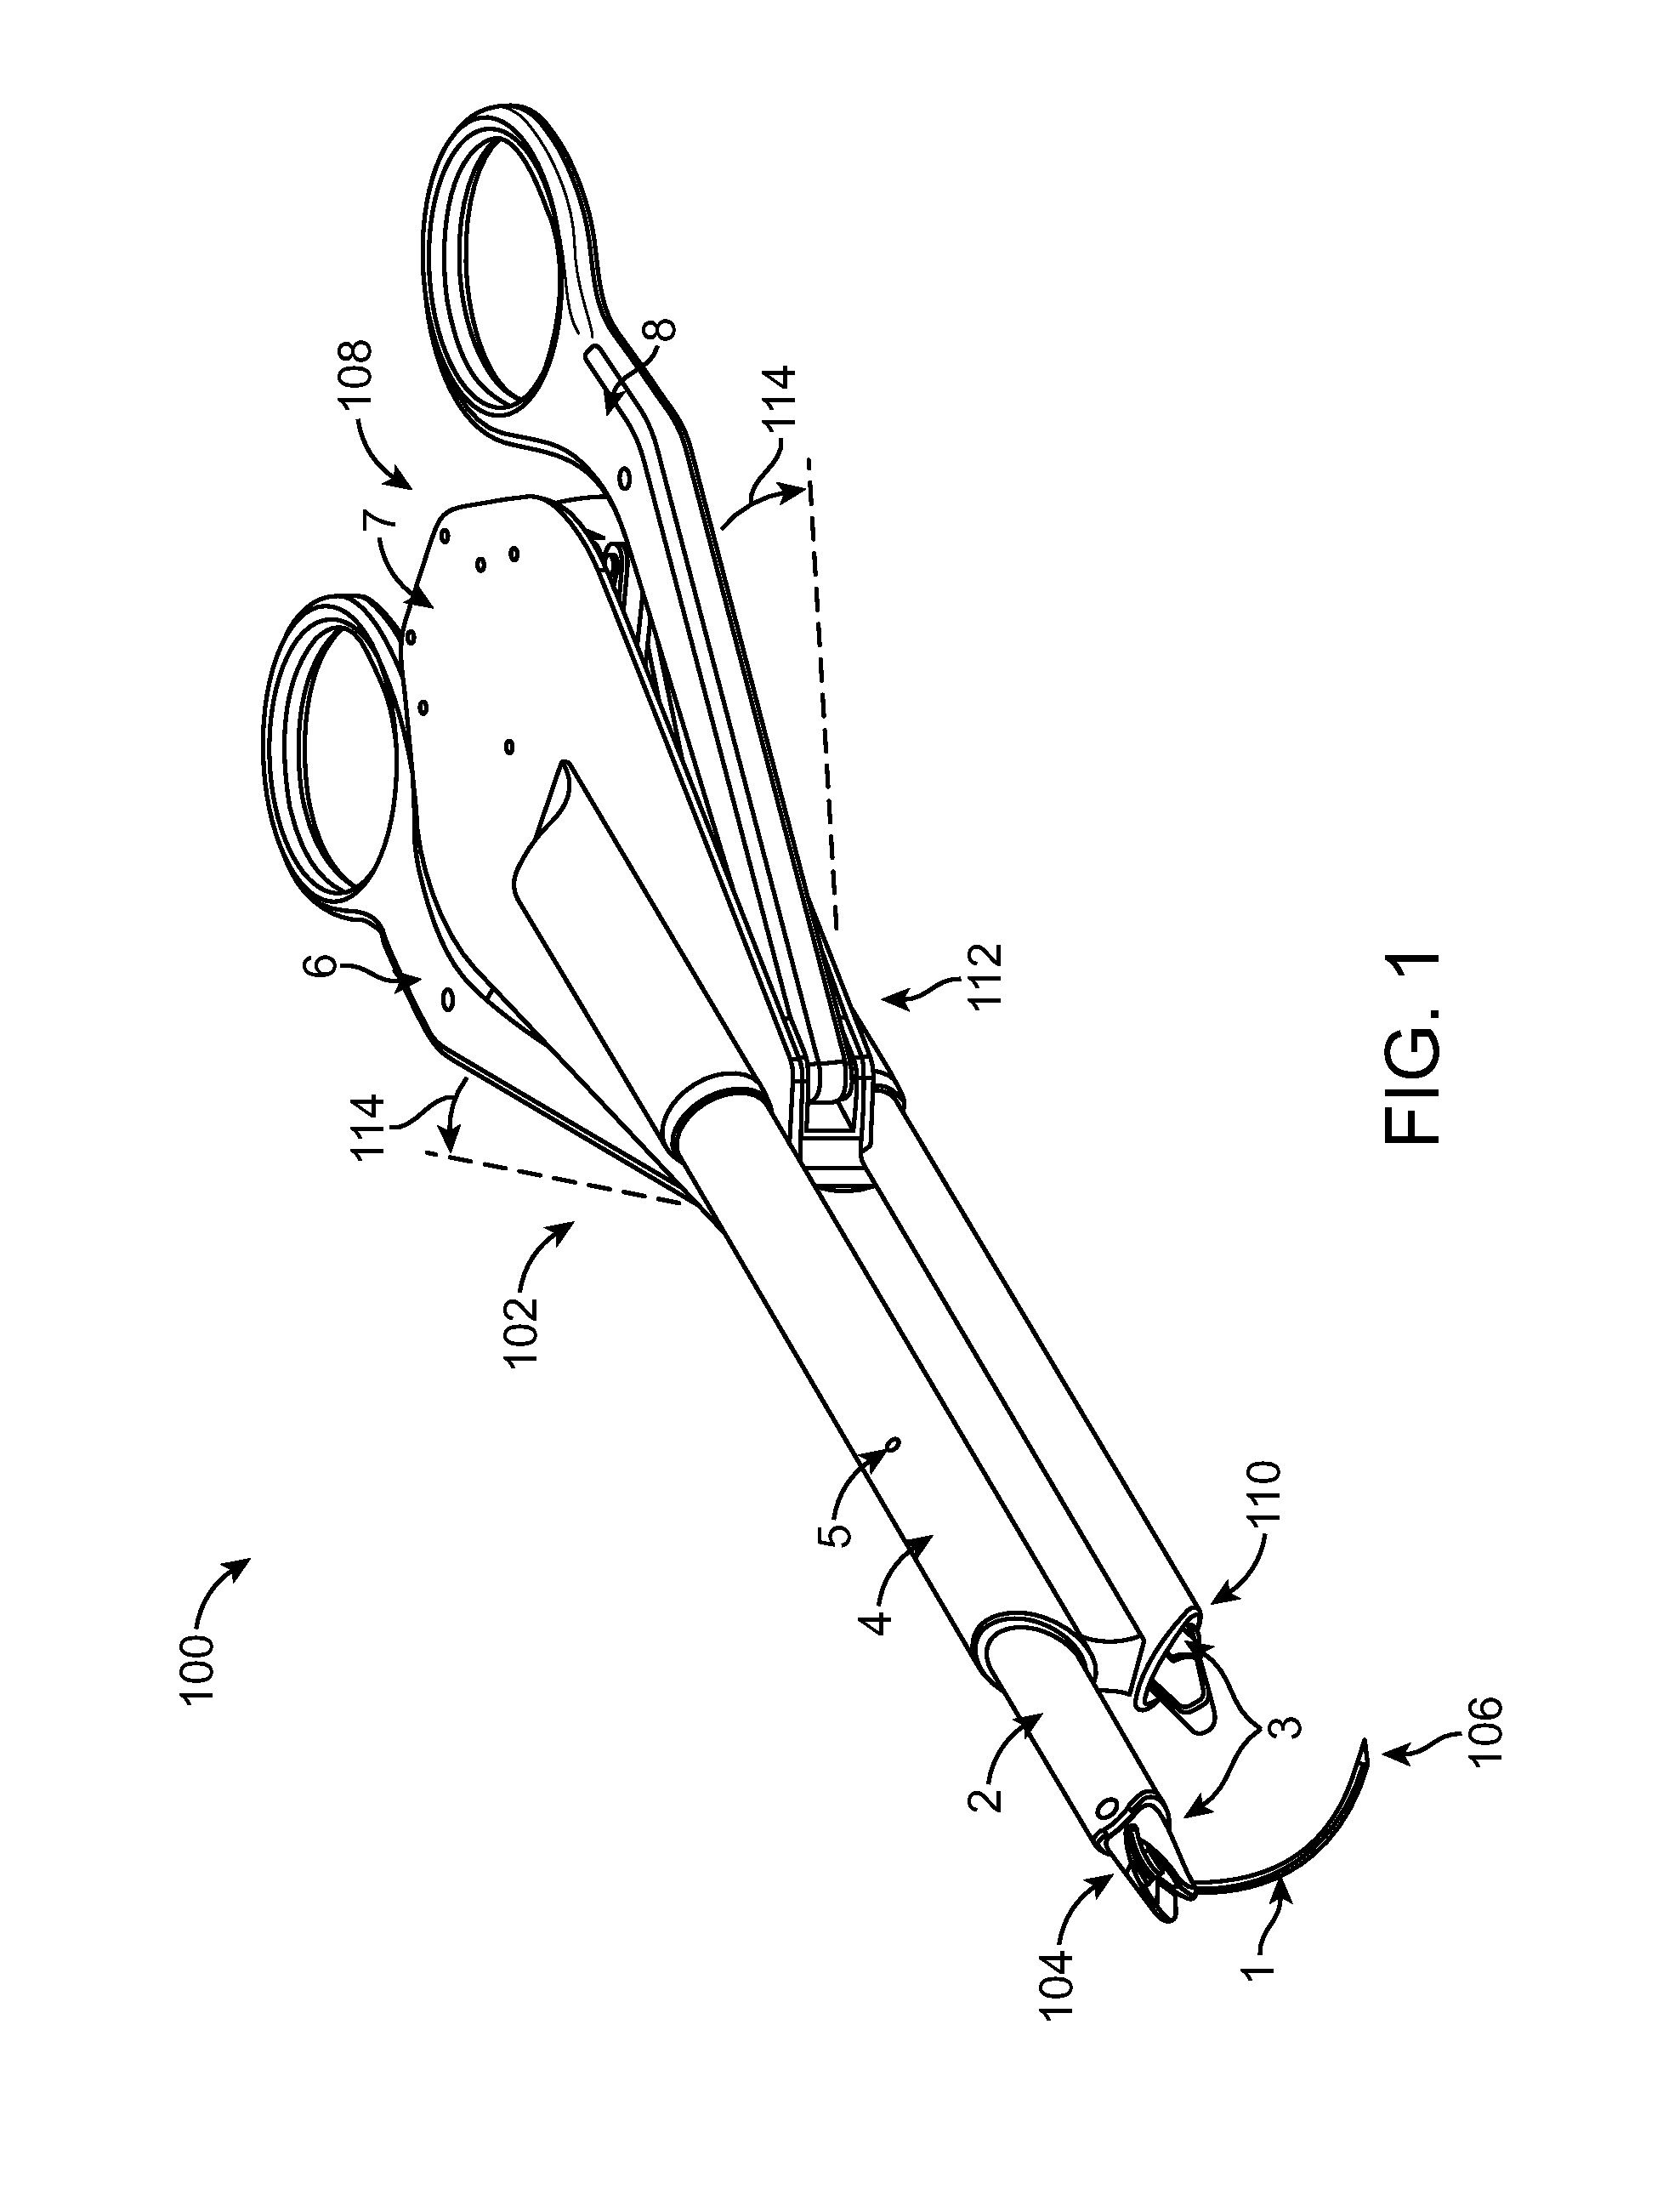 Replaceable Tip Suturing Devices, System, and Methods for Use with Differing Needles